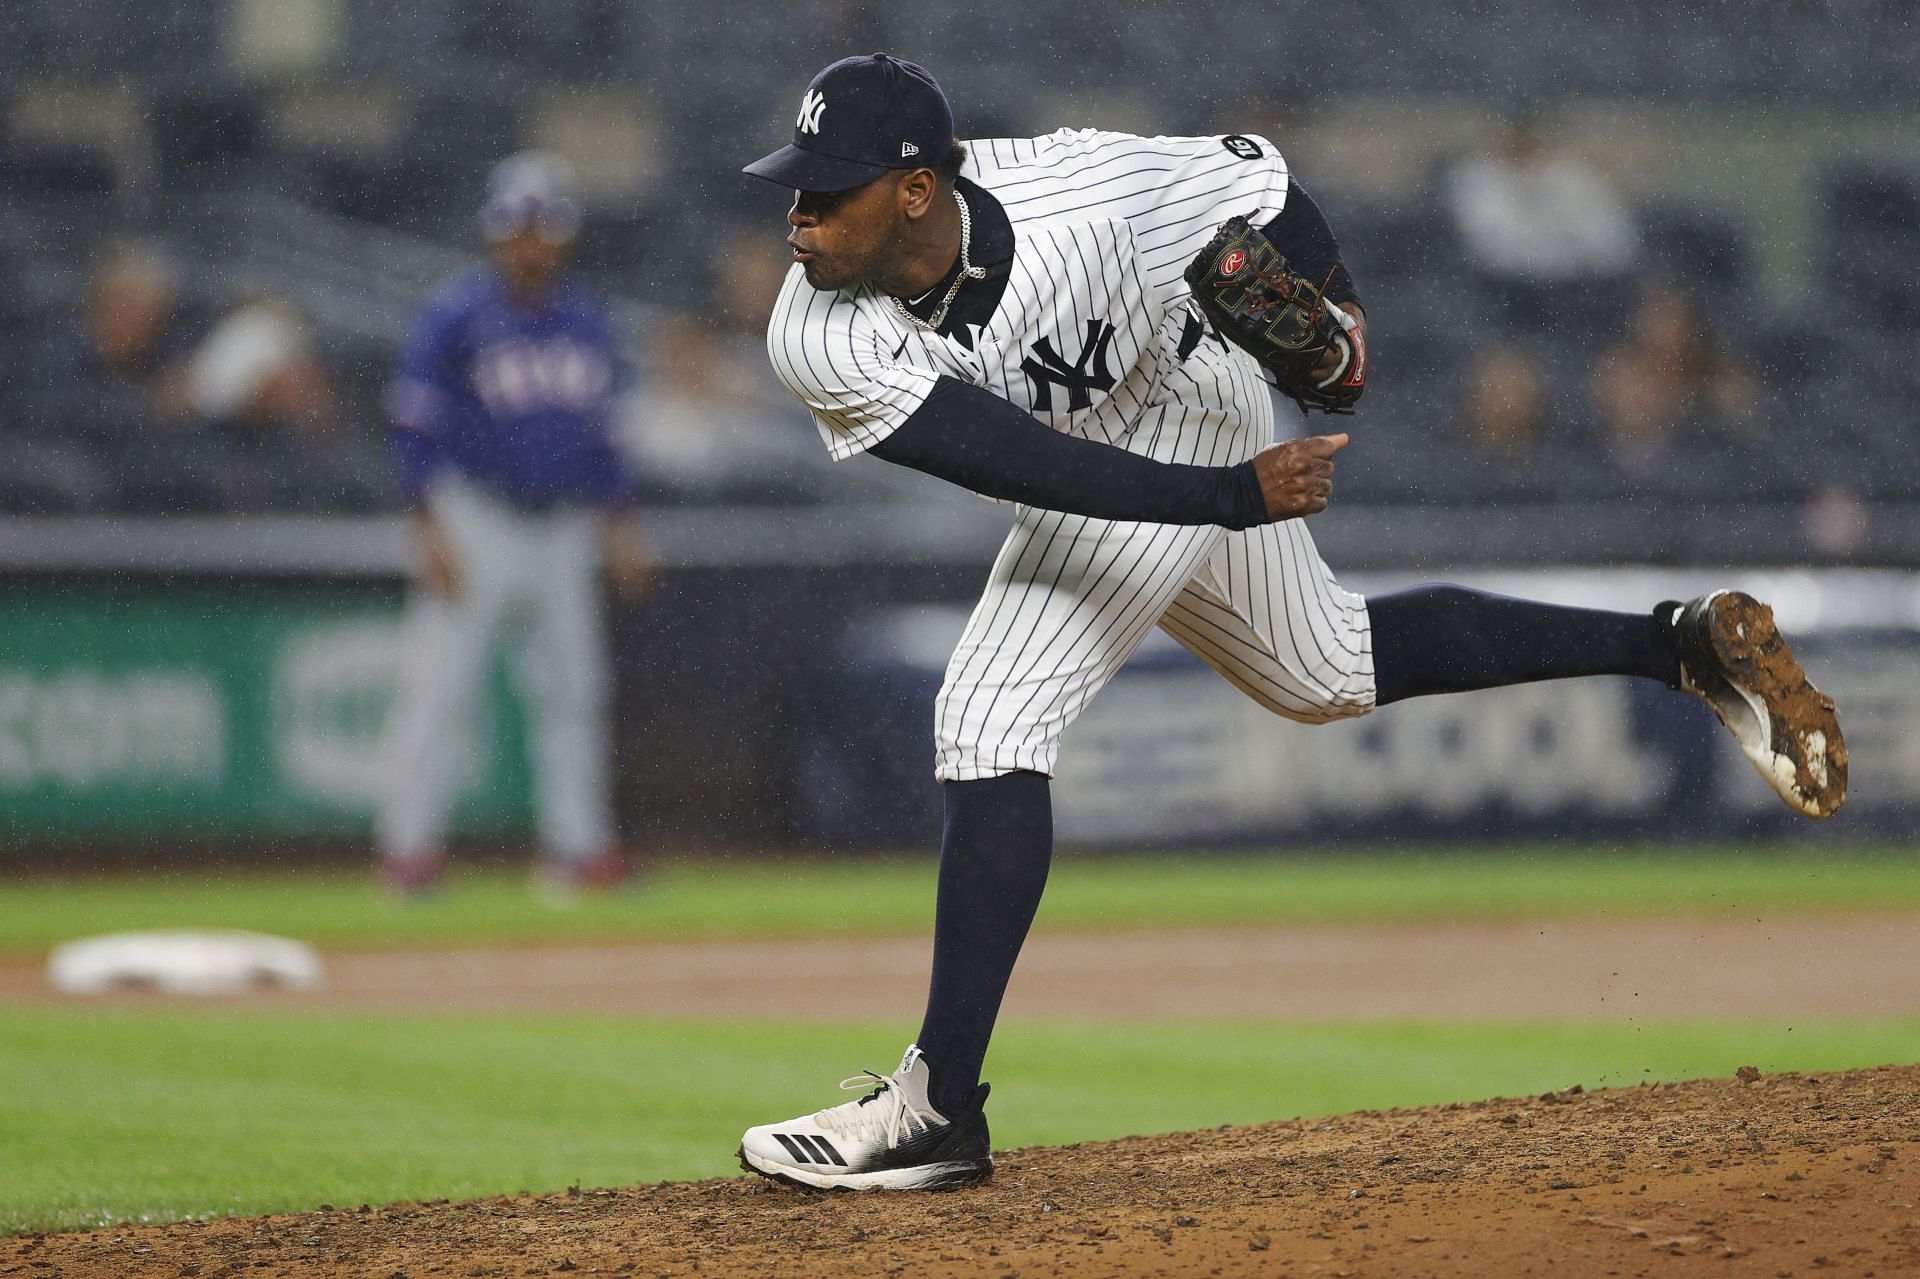 New York Yankees pitcher Luis Severino among the first pro pitchers to sample the new technology